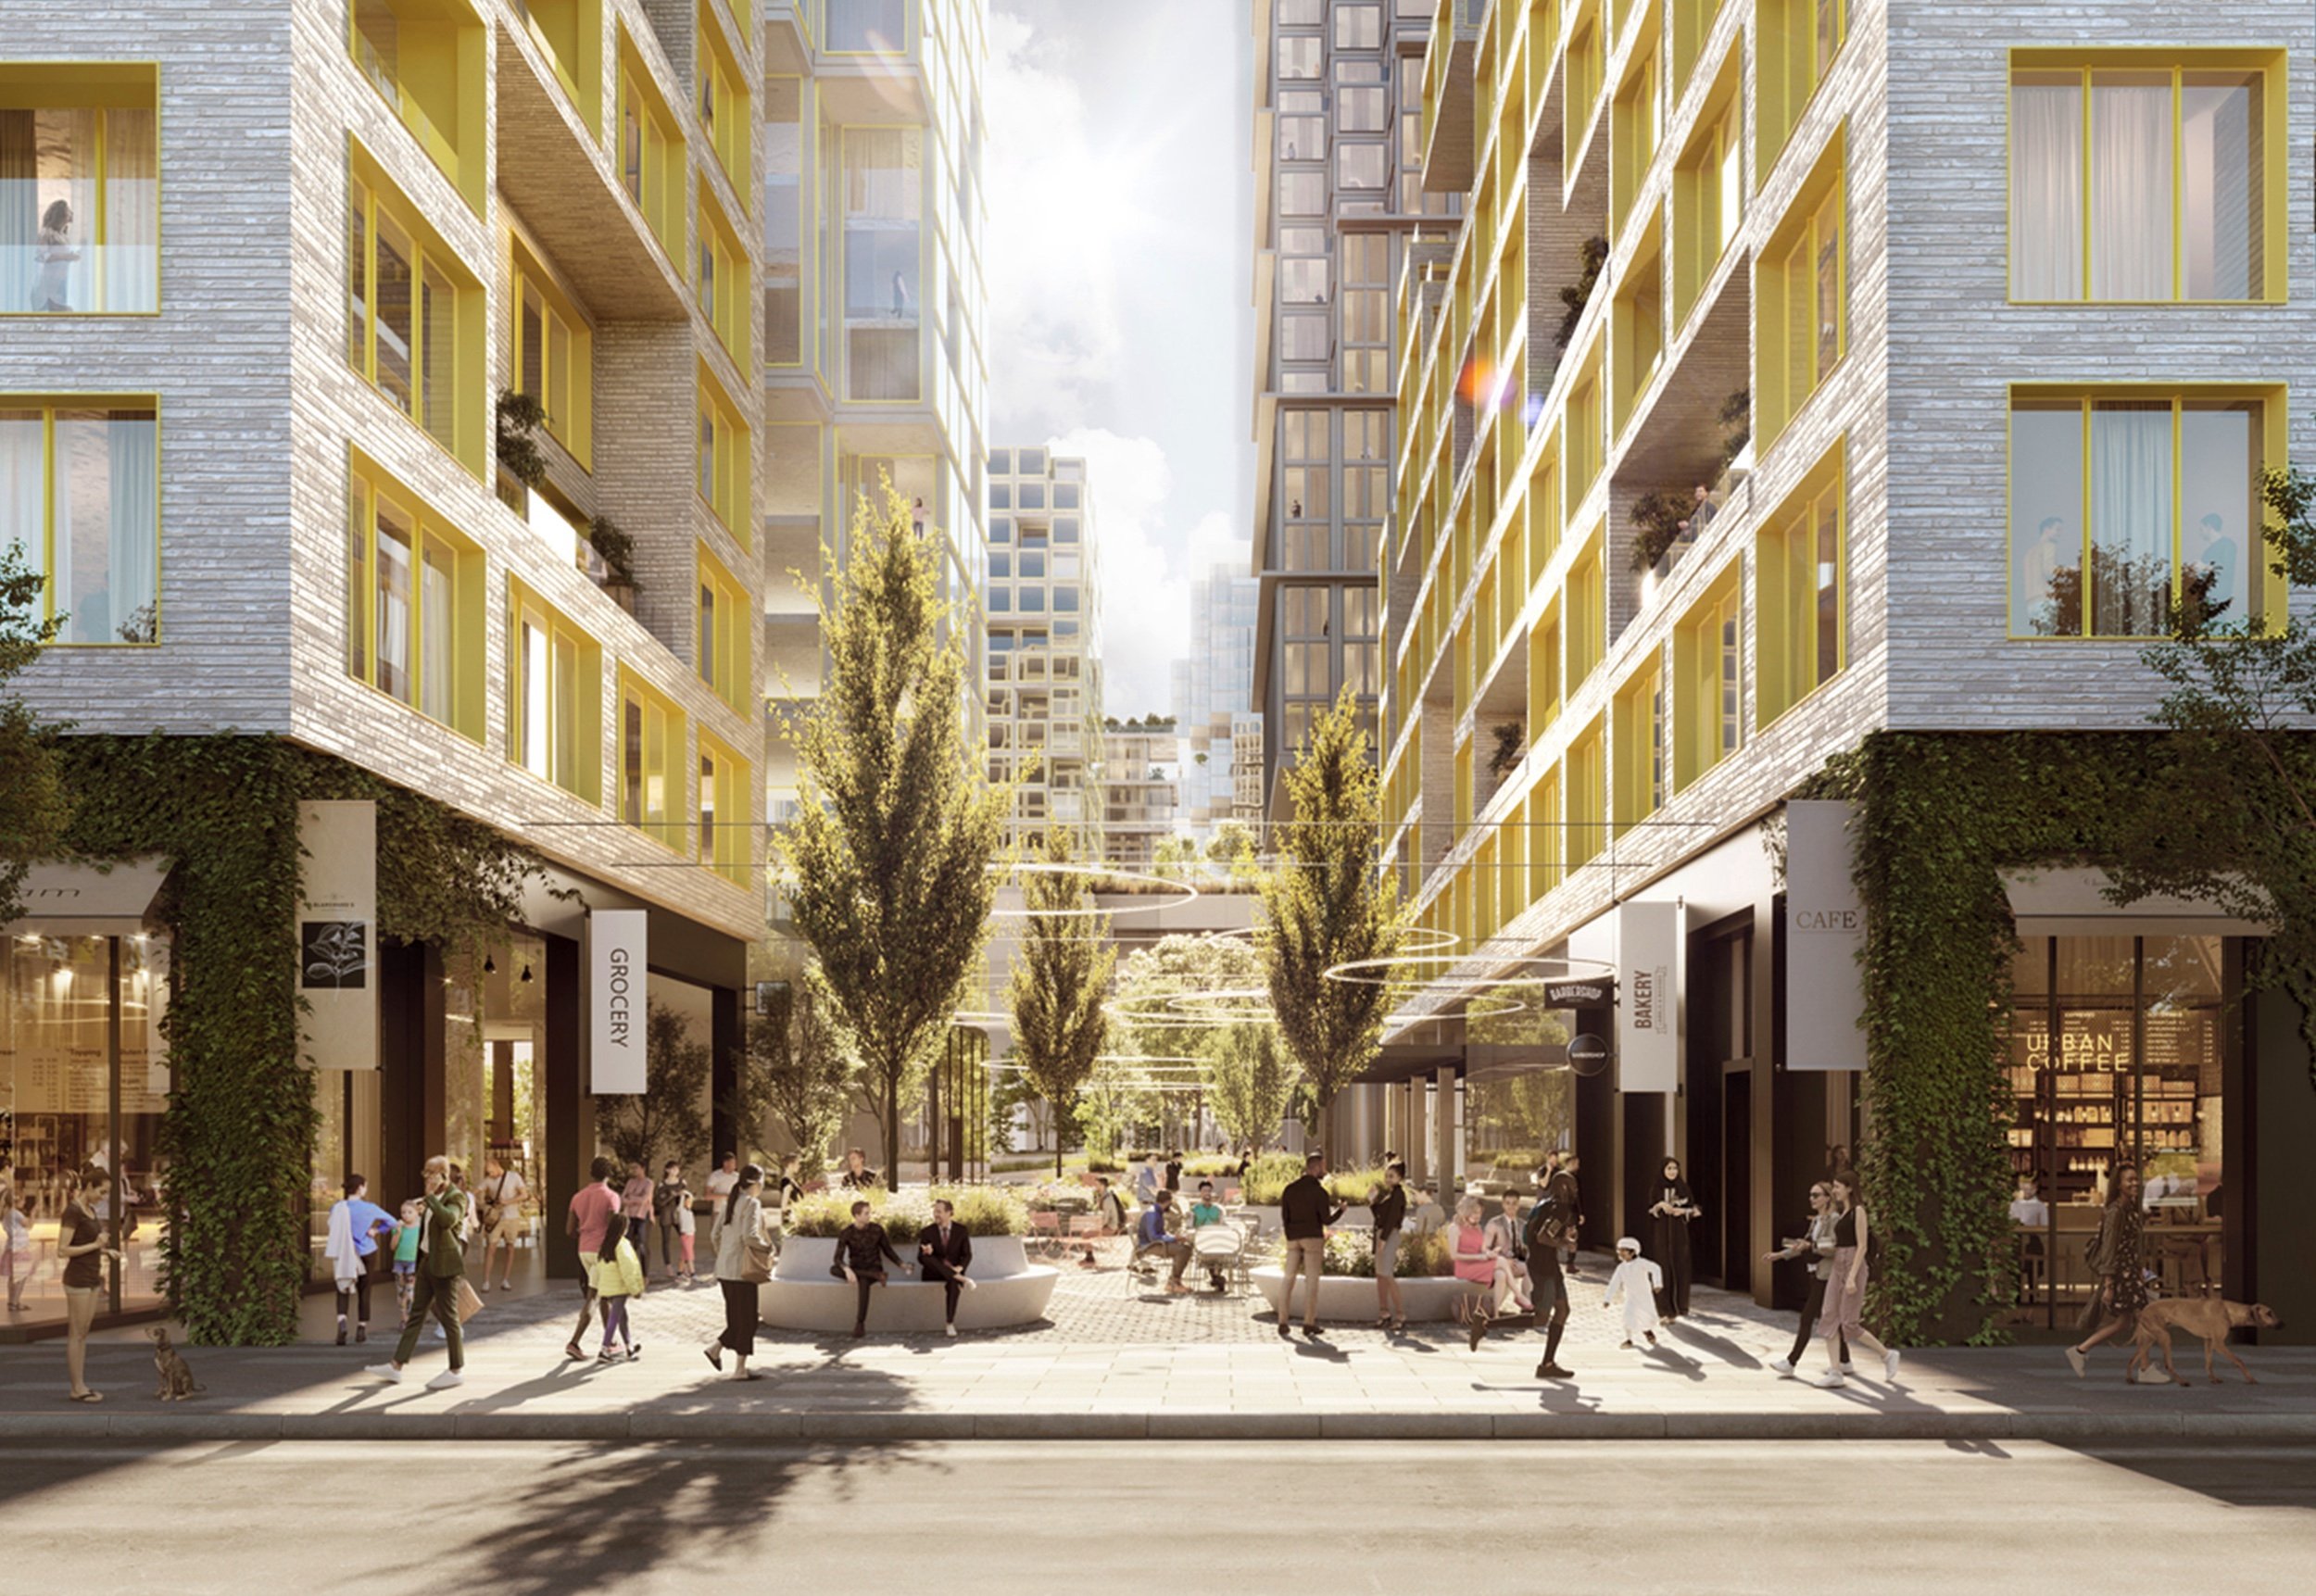 oda-designs-mixed-use-district-to-revitalize-the-astoria-neighborhood-in-new-york-city_9.jpg